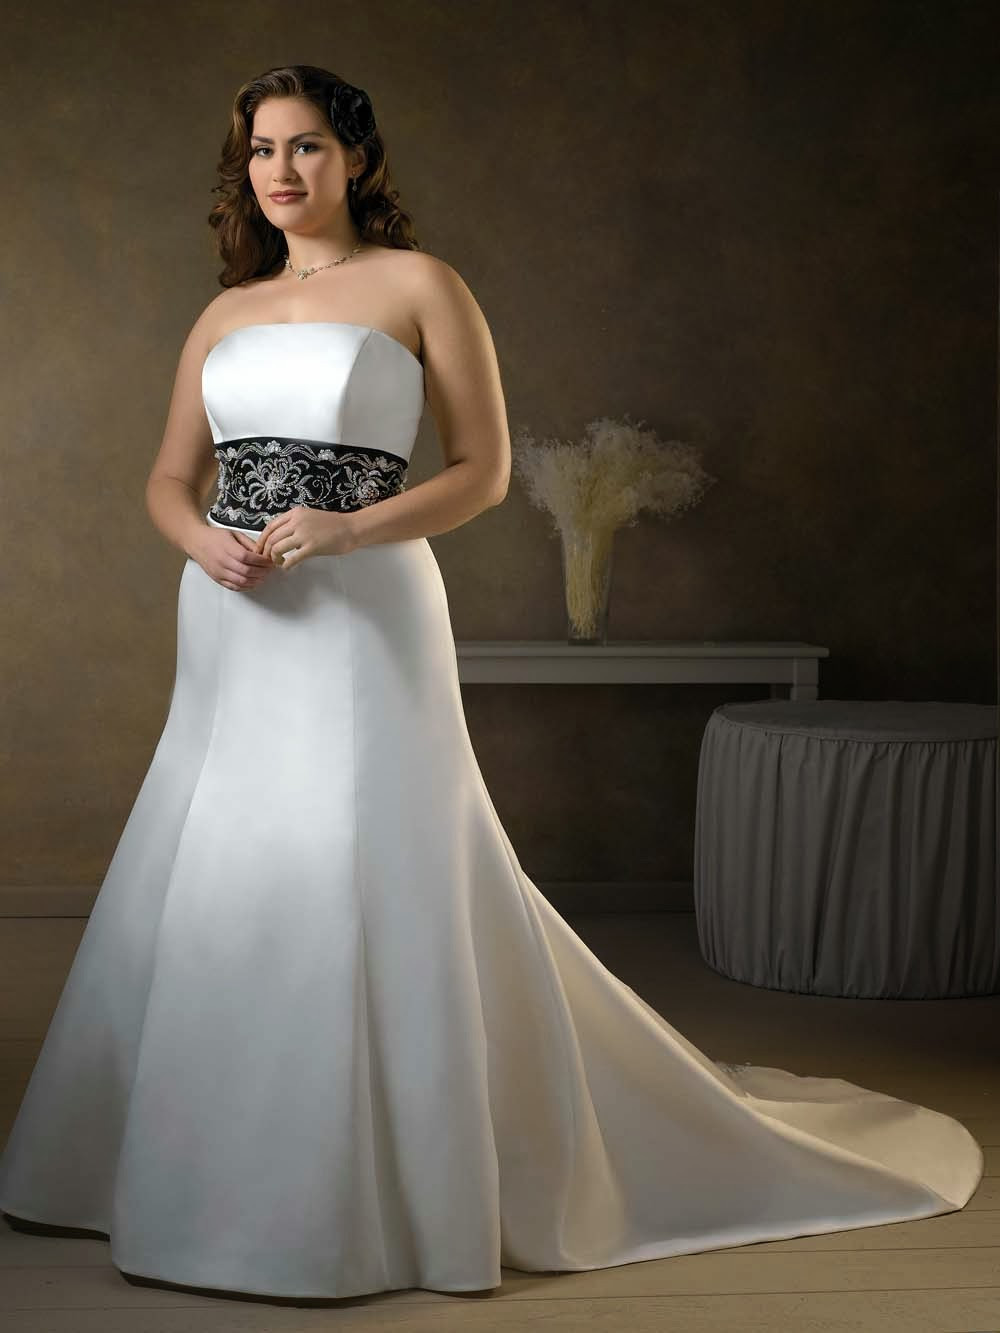 Plus Size Wedding Gowns Cheap
 USED WEDDING GOWN GET HIGH QUALITY PLUS SIZE DRESS WITH